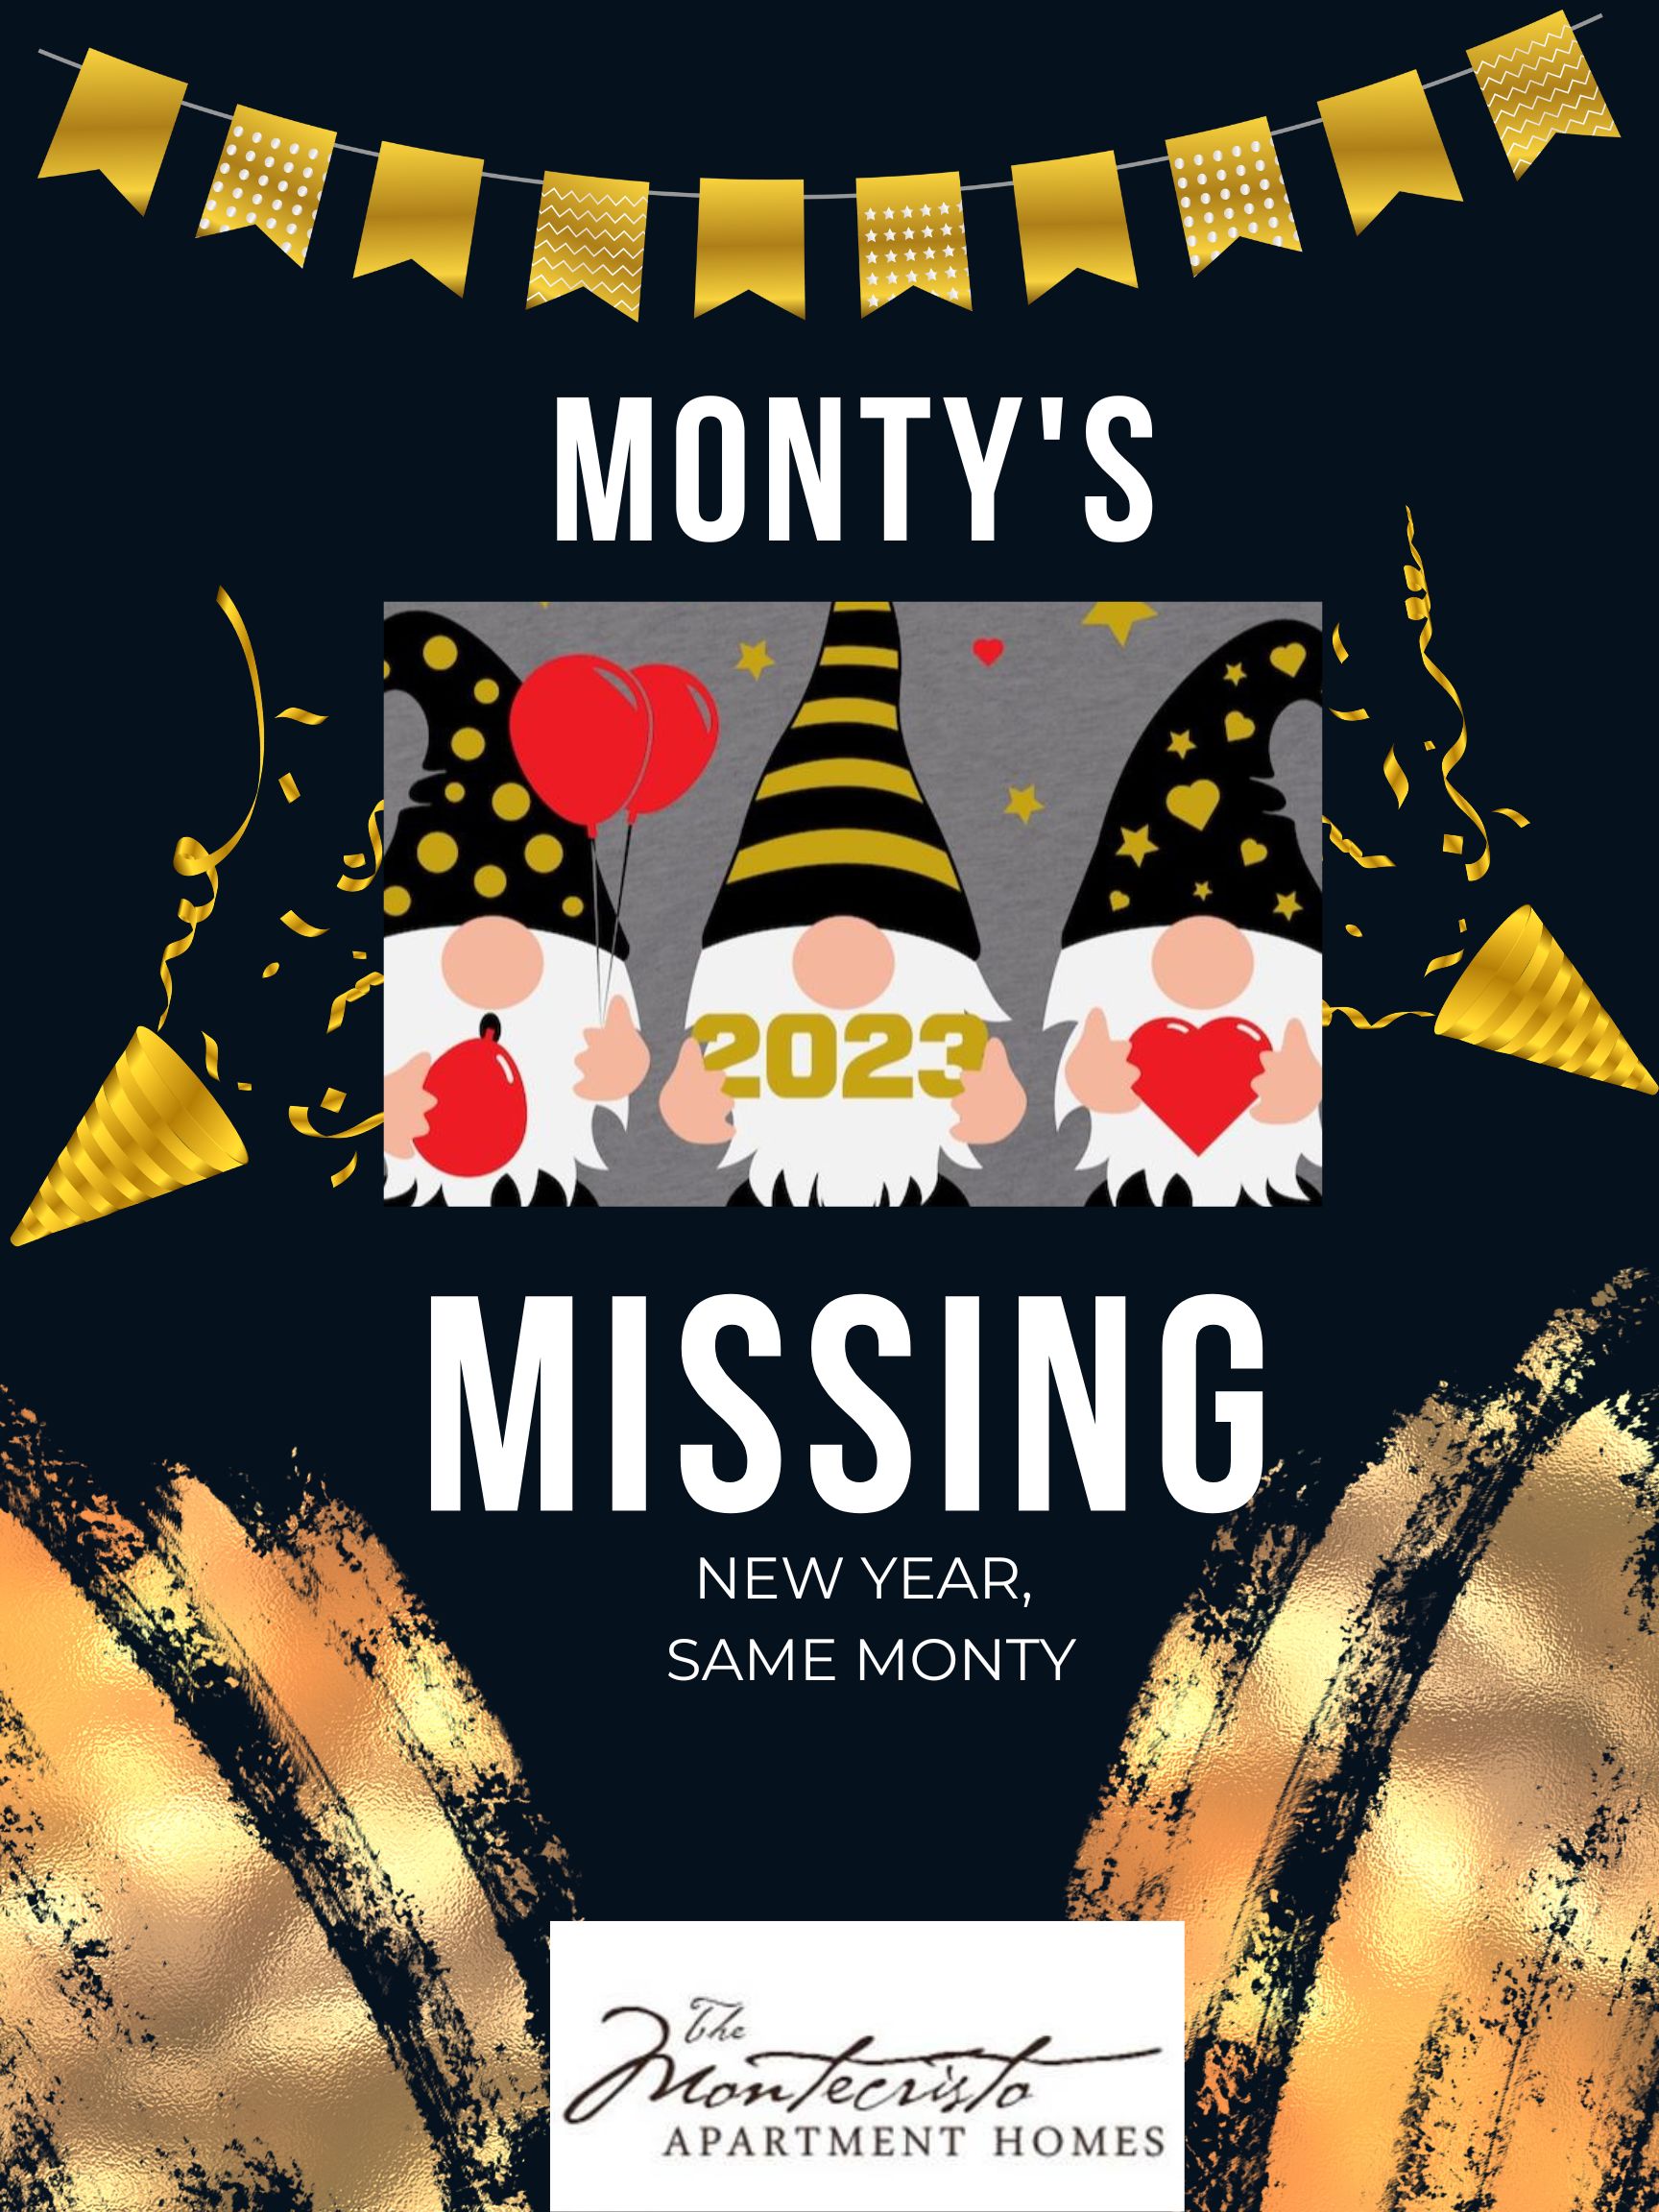 The Montecristo Apartments in Stone Oak, San Antonio, have become the backdrop for a mysterious disappearance on New Year's Eve.